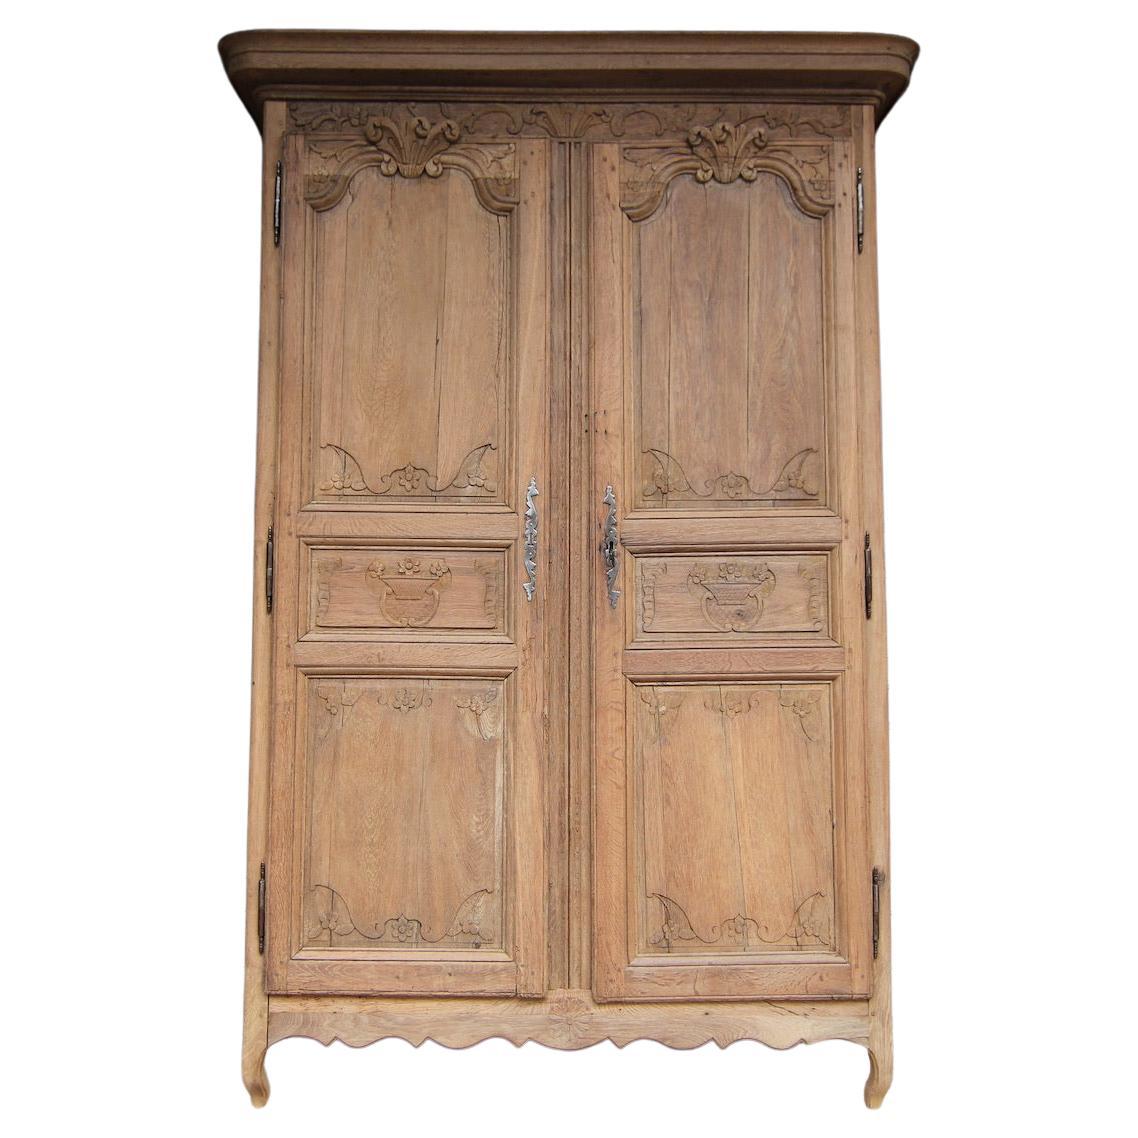 Early 19th Century French Provincial Armoire in Stripped Oak